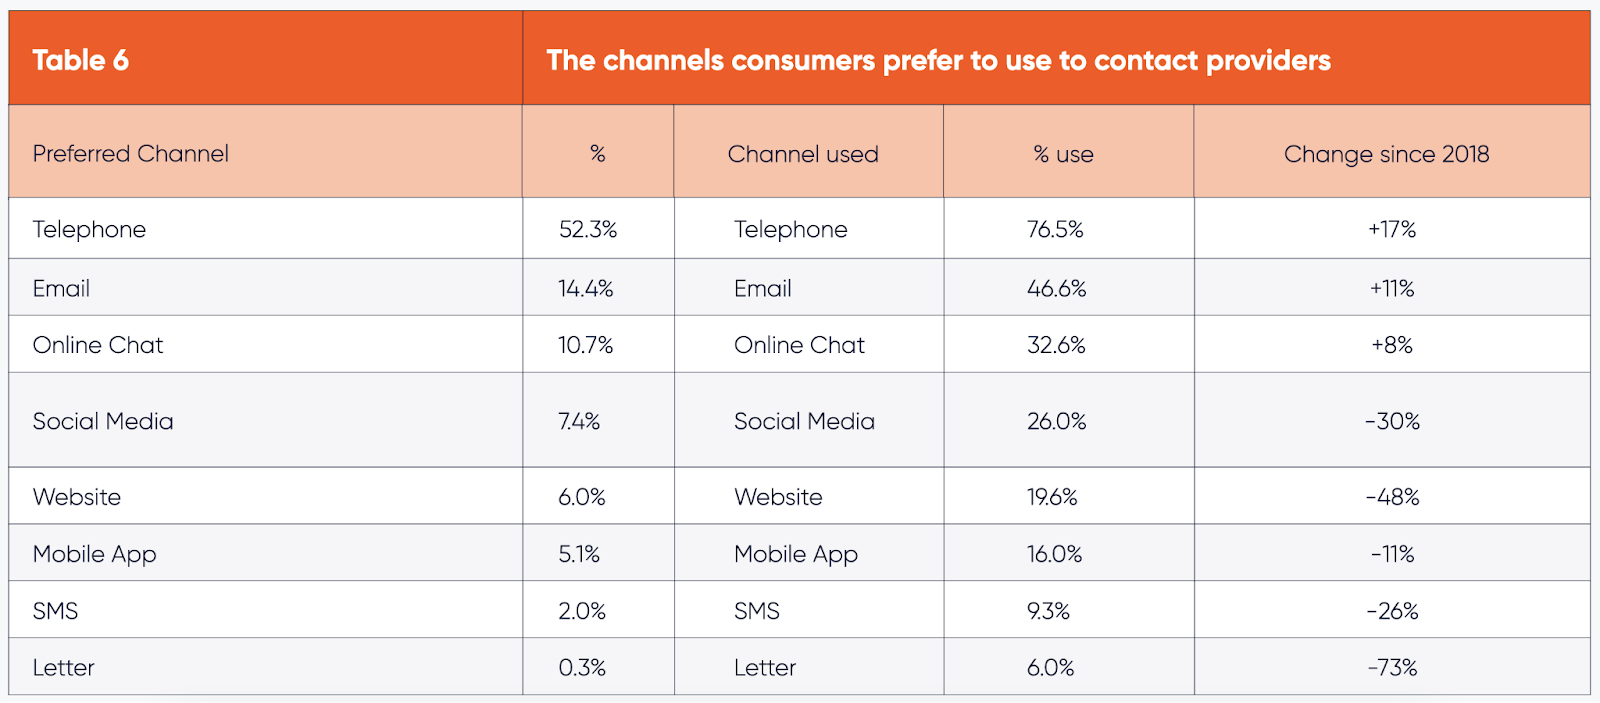 CallMiner's table showing the channels consumers prefer to use to contact providers